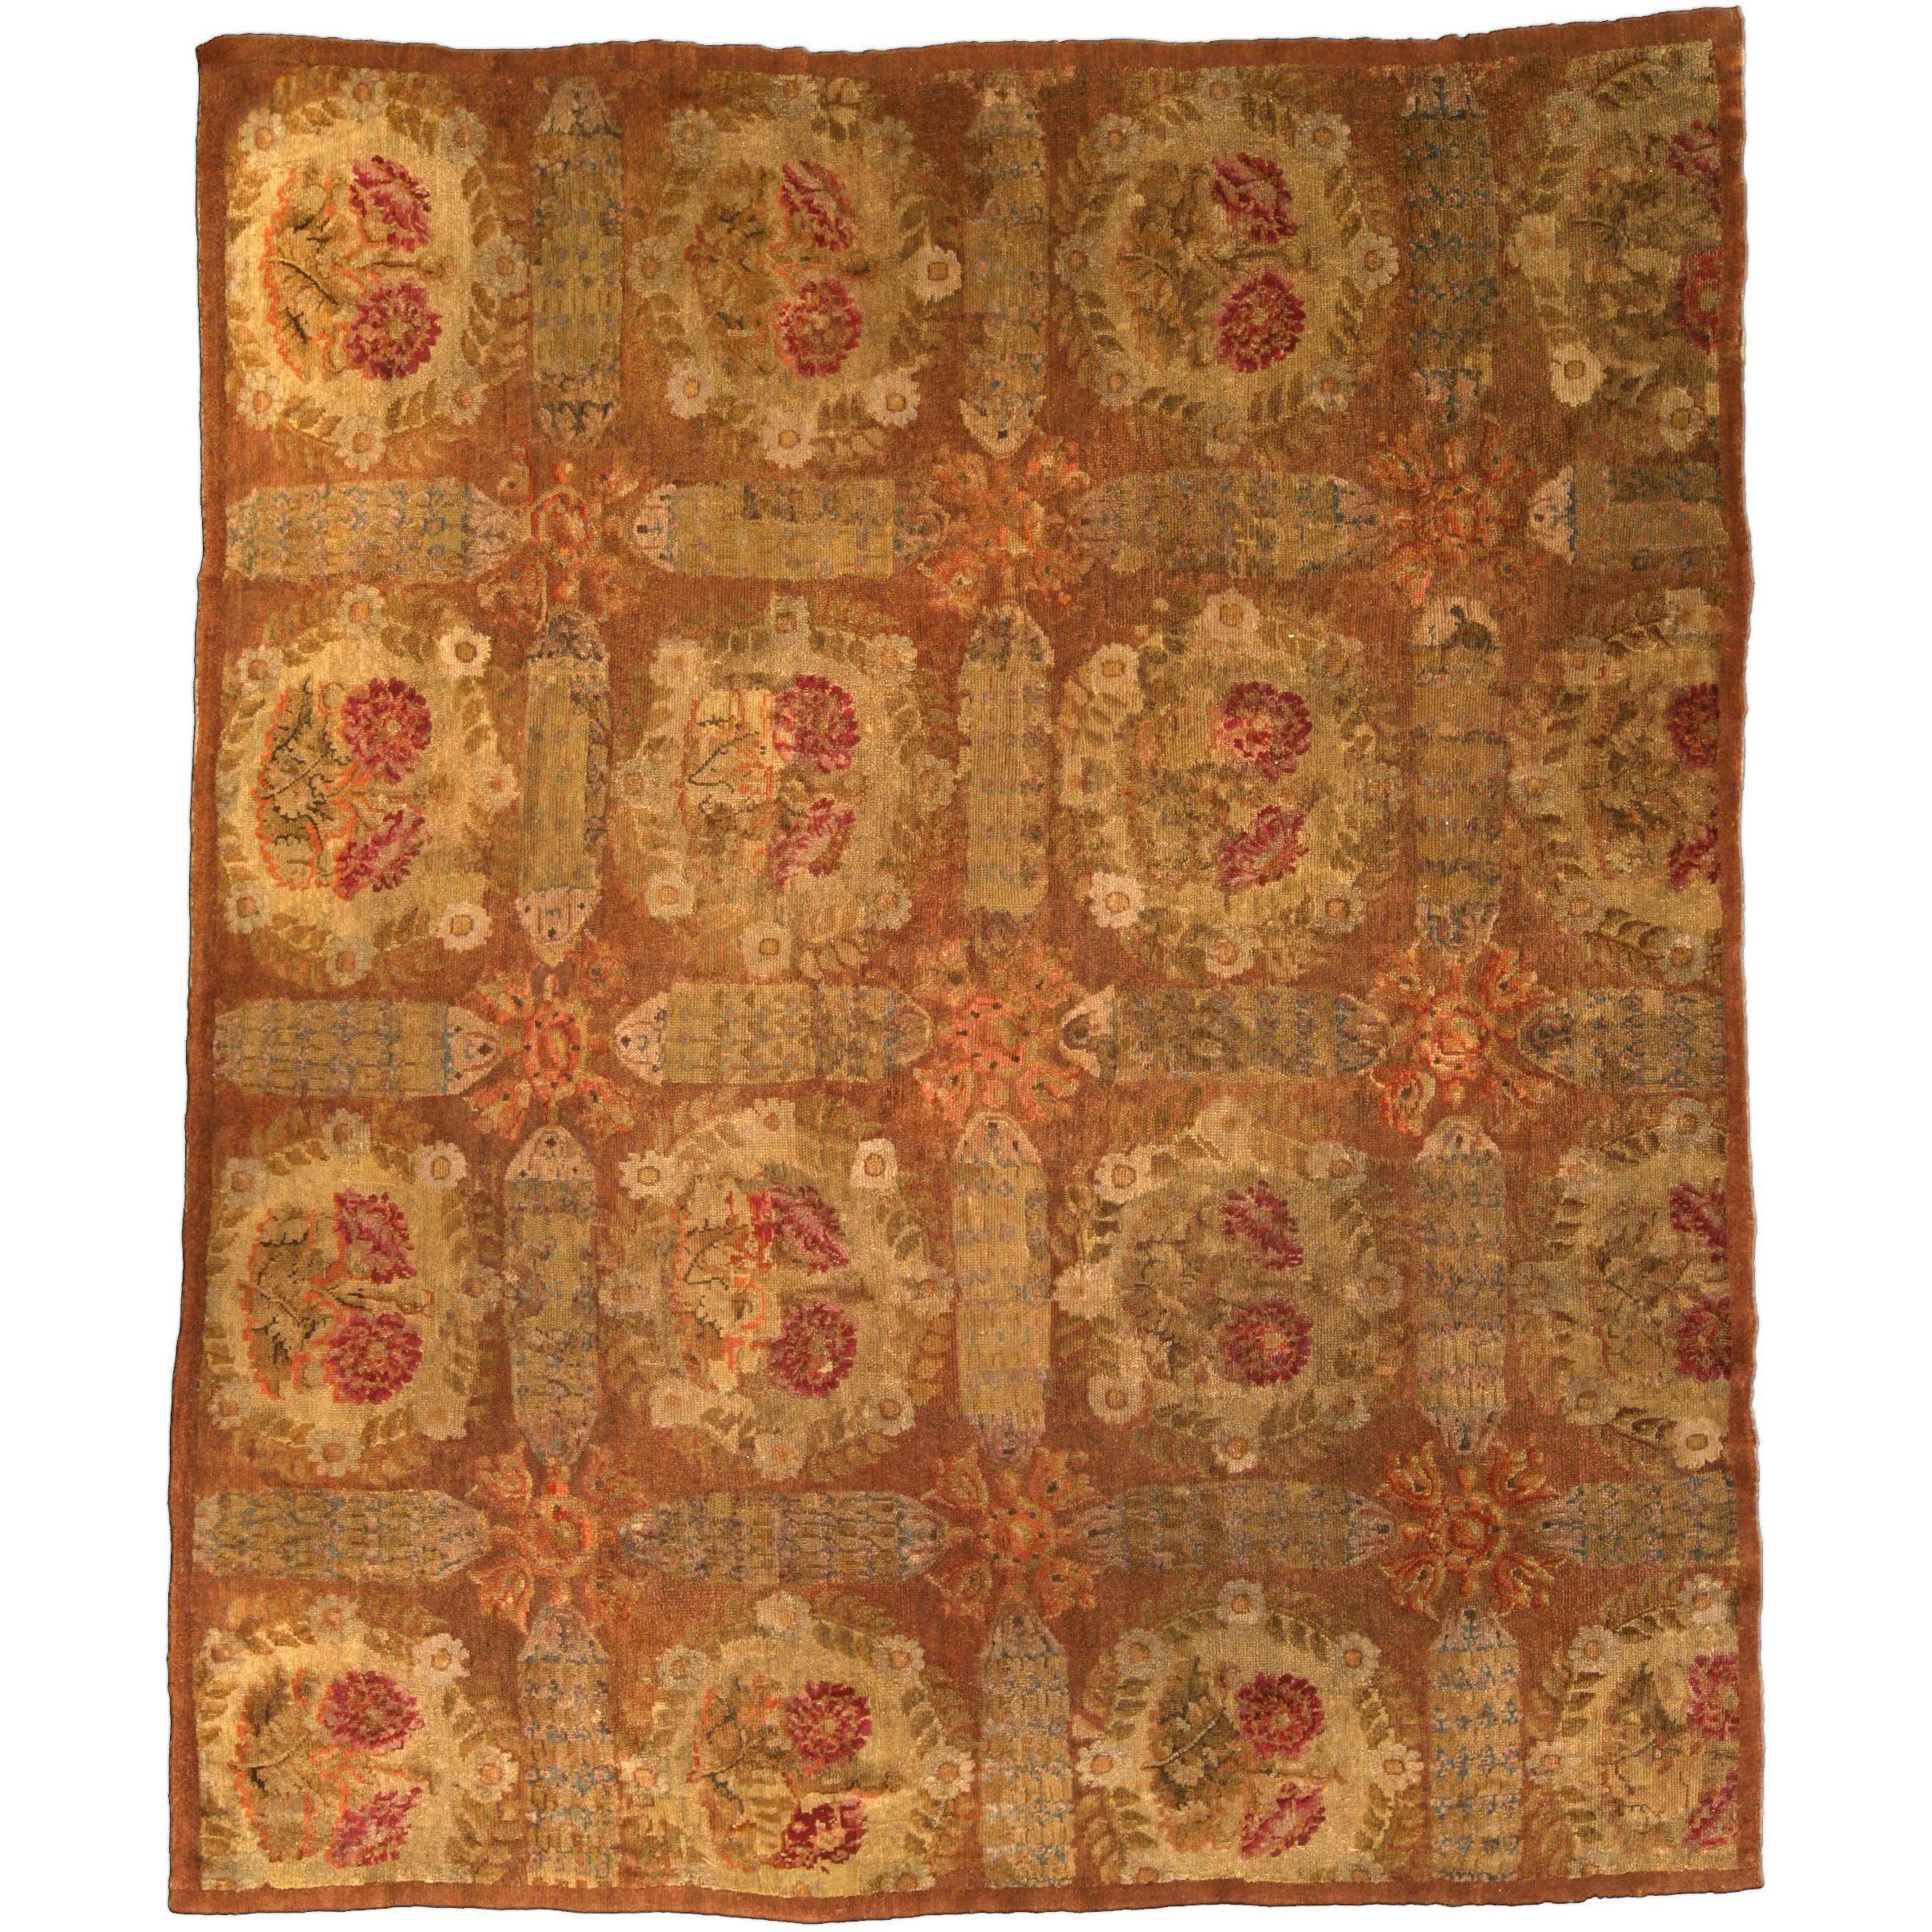 1800s French Savonnerie Floral Handmade Wool Rug